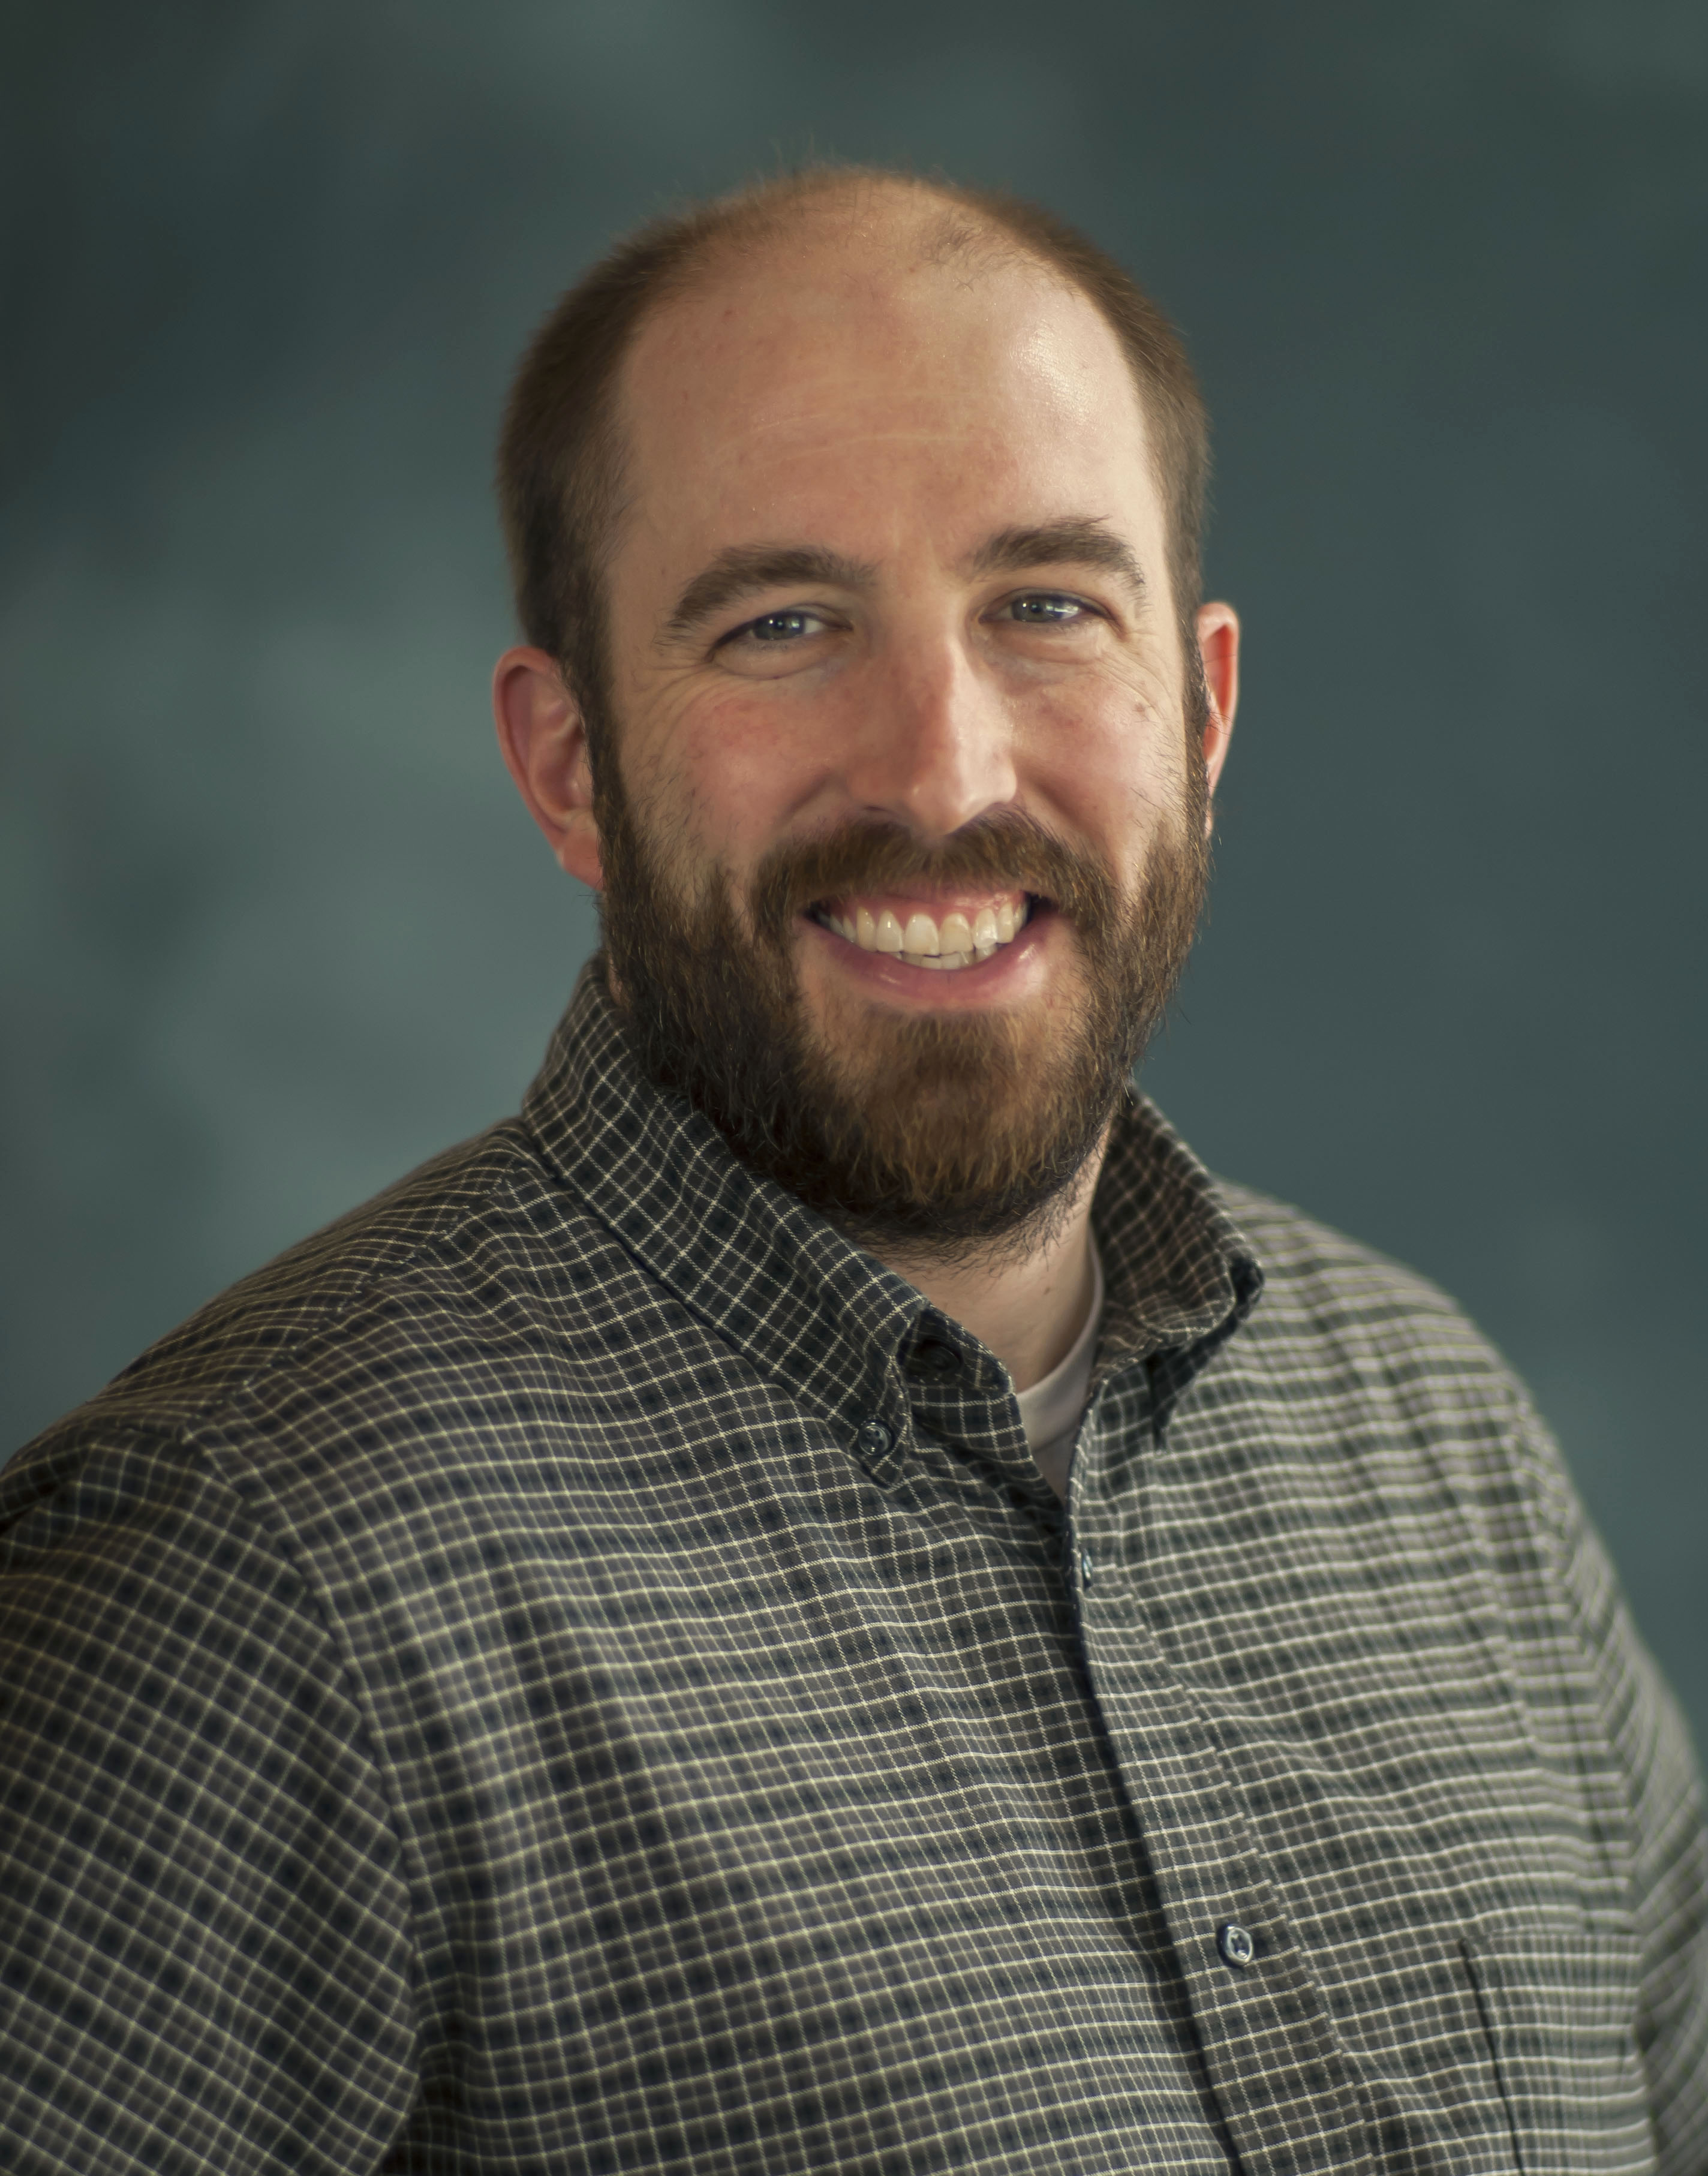 Dr. Tom Stone is an assistant professor at Husson University’s School of Science and Humanities.